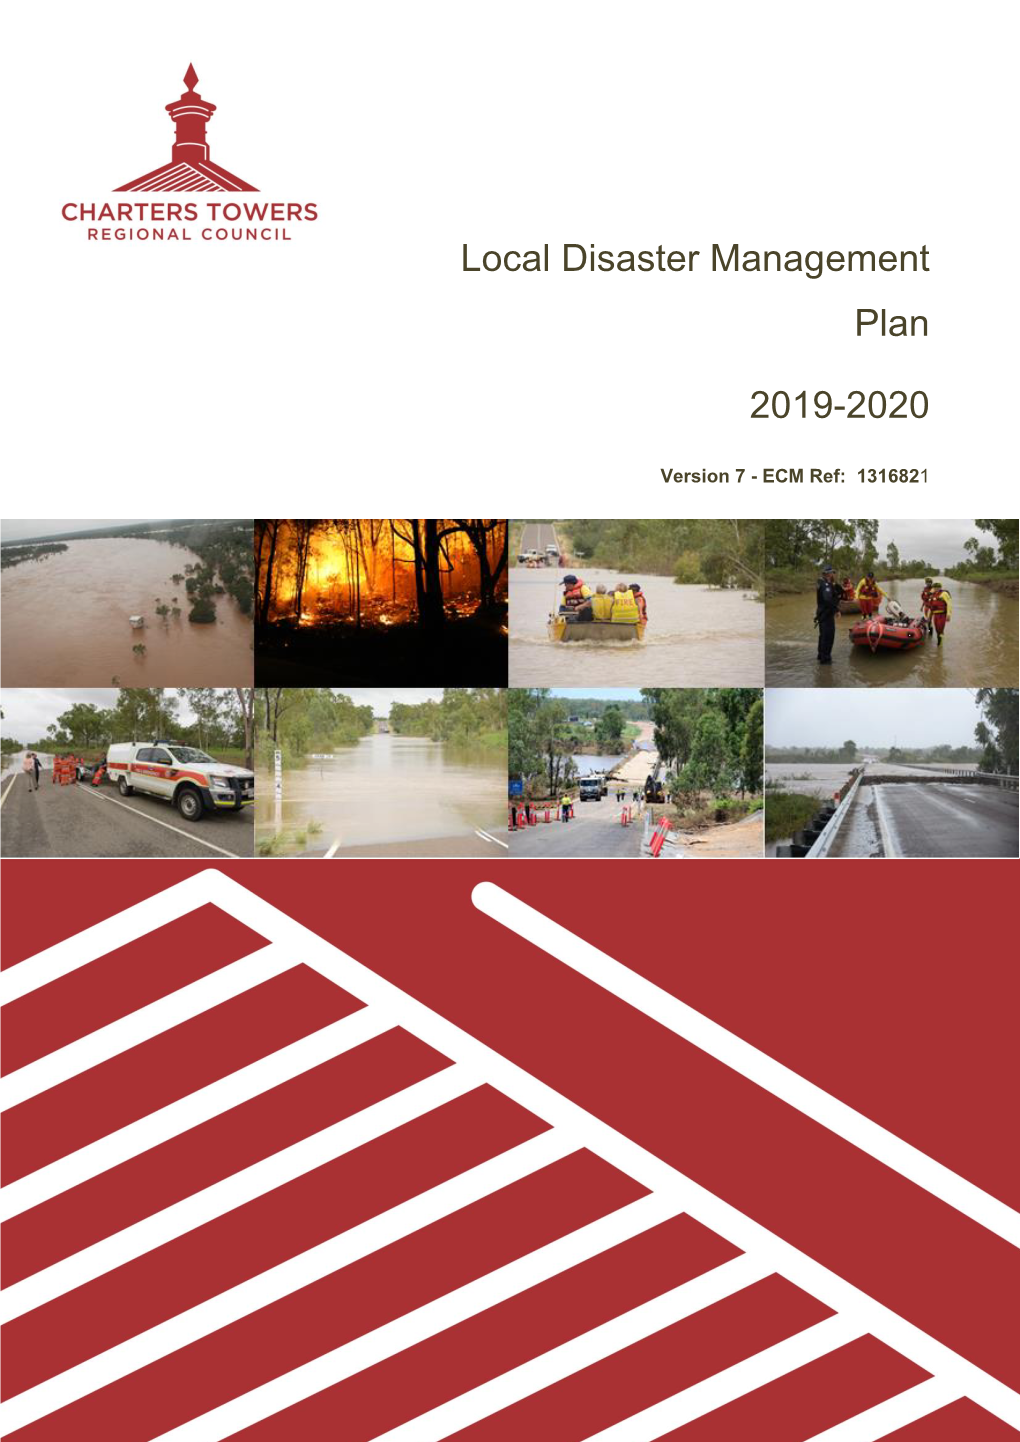 Local Disaster Management Plan 2019-2020 - Version 7 - 1316821 Page 1